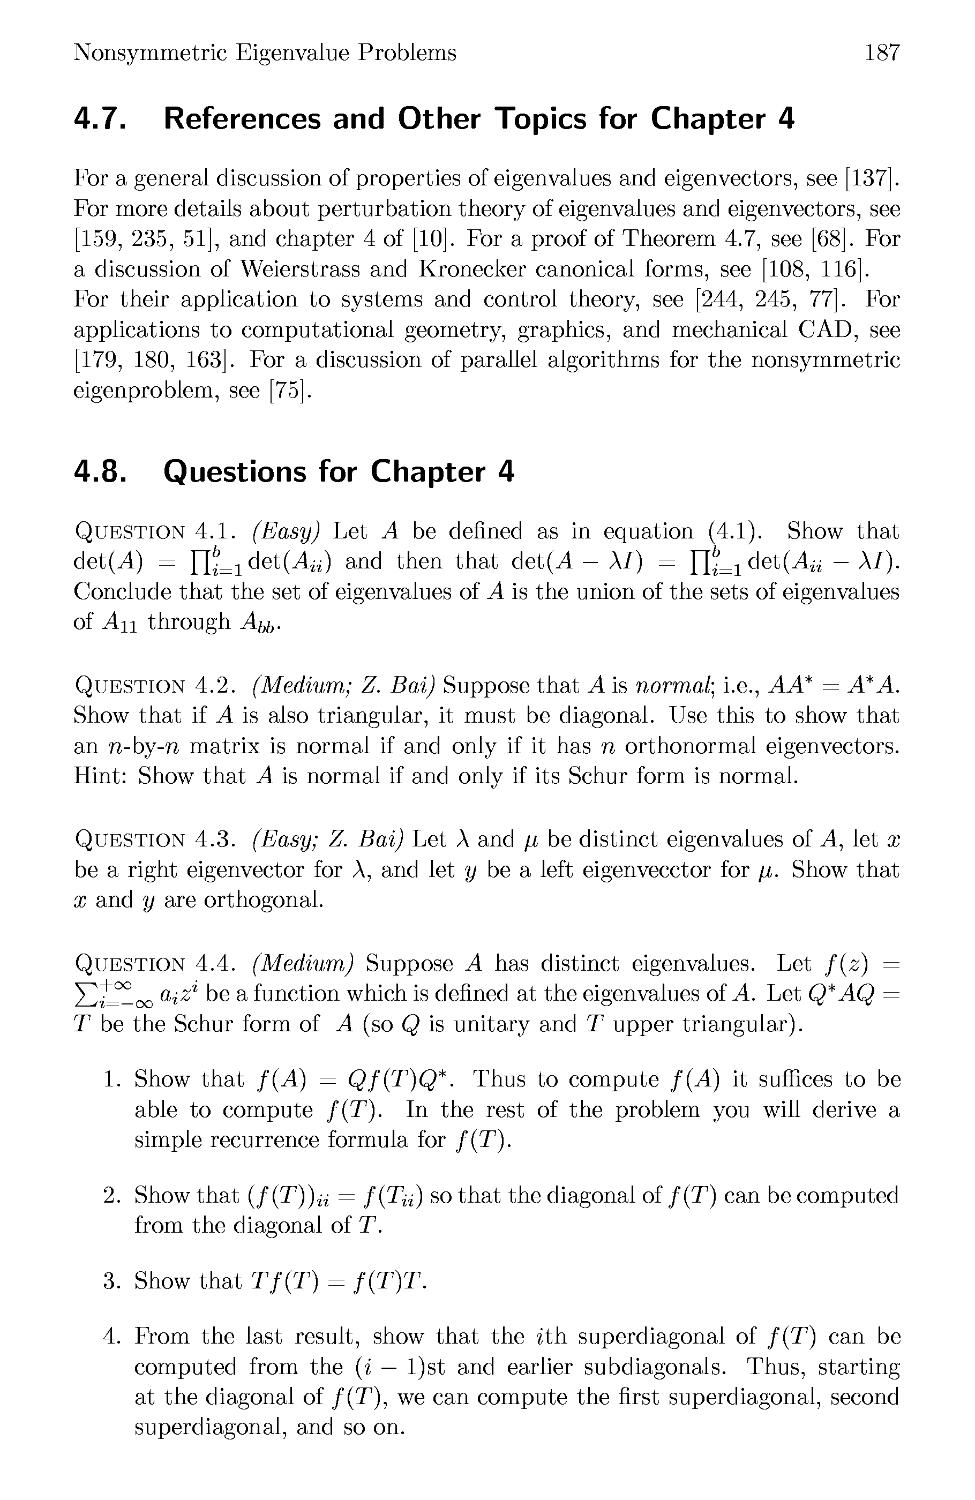 4.7 References and Other Topics for Chapter 4
4.8 Questions for Chapter 4